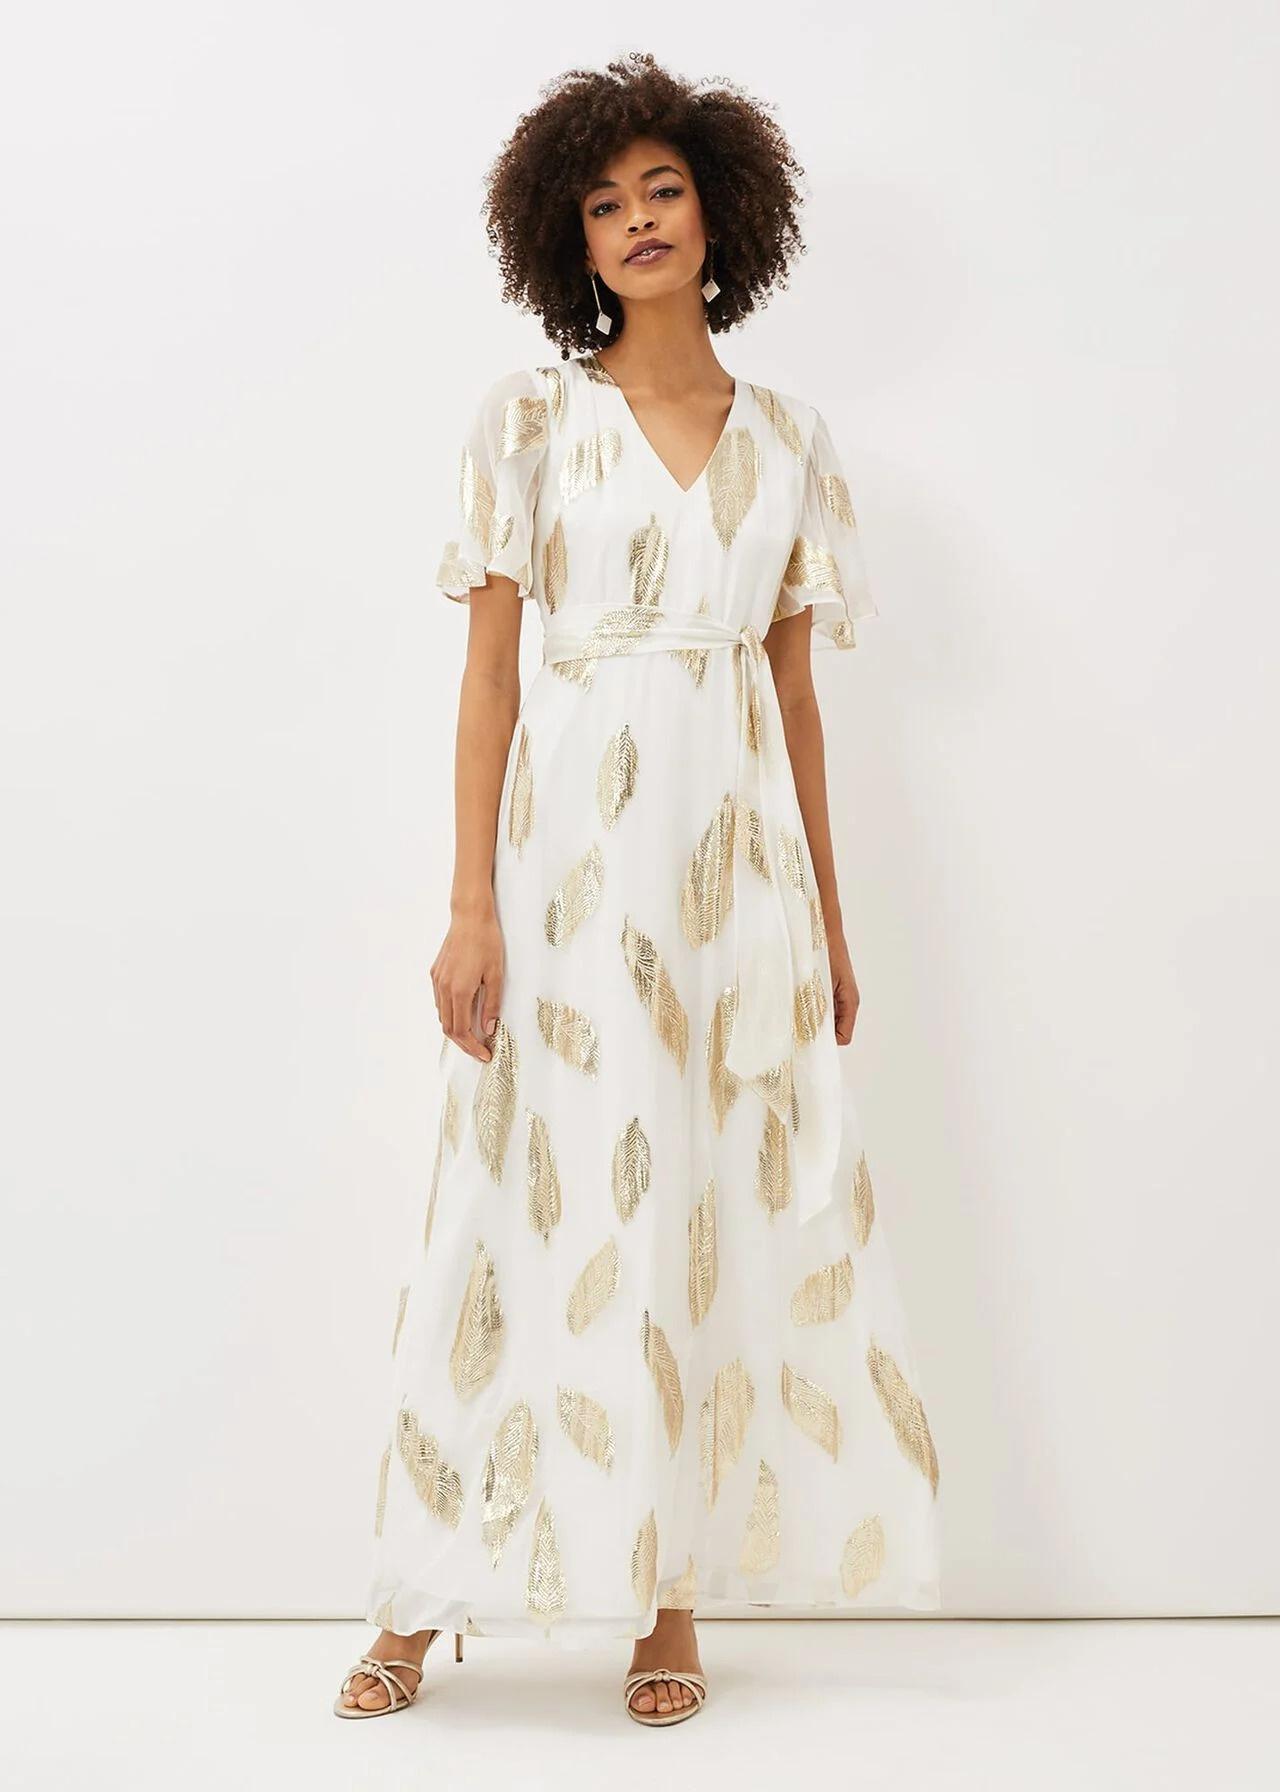 31 of the Best Casual Wedding Dresses for Laid-Back Brides - hitched.co.uk